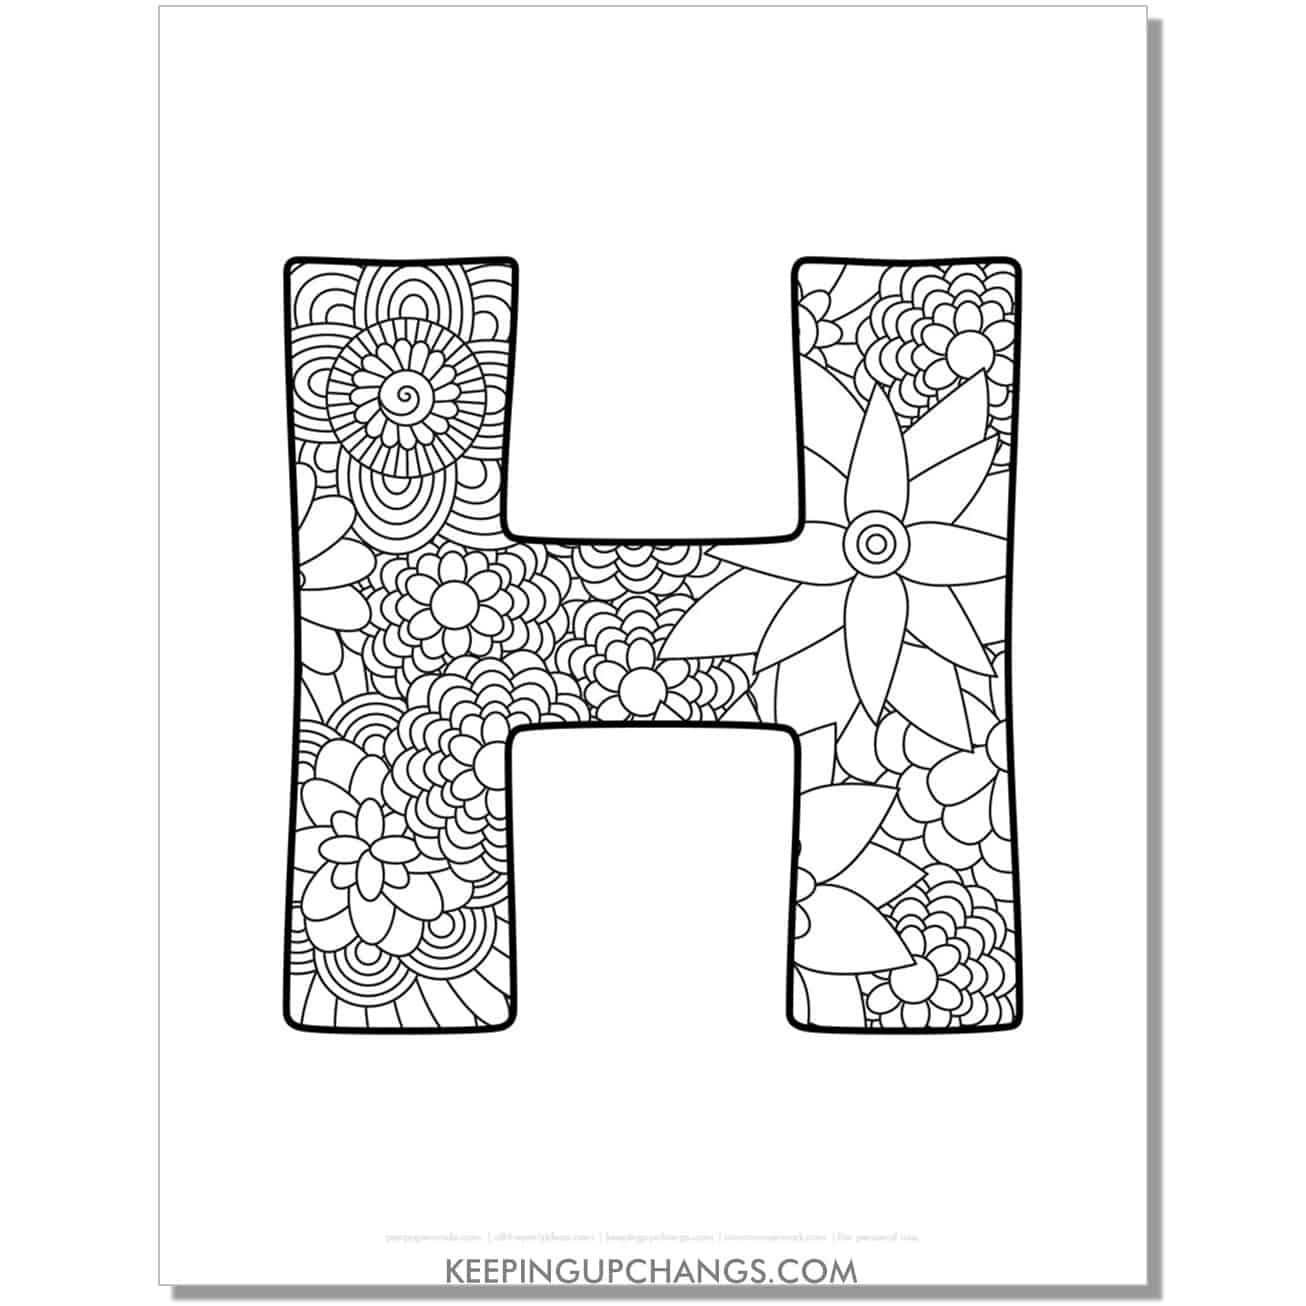 free letter h to color, complex mandala zentangle for adults.